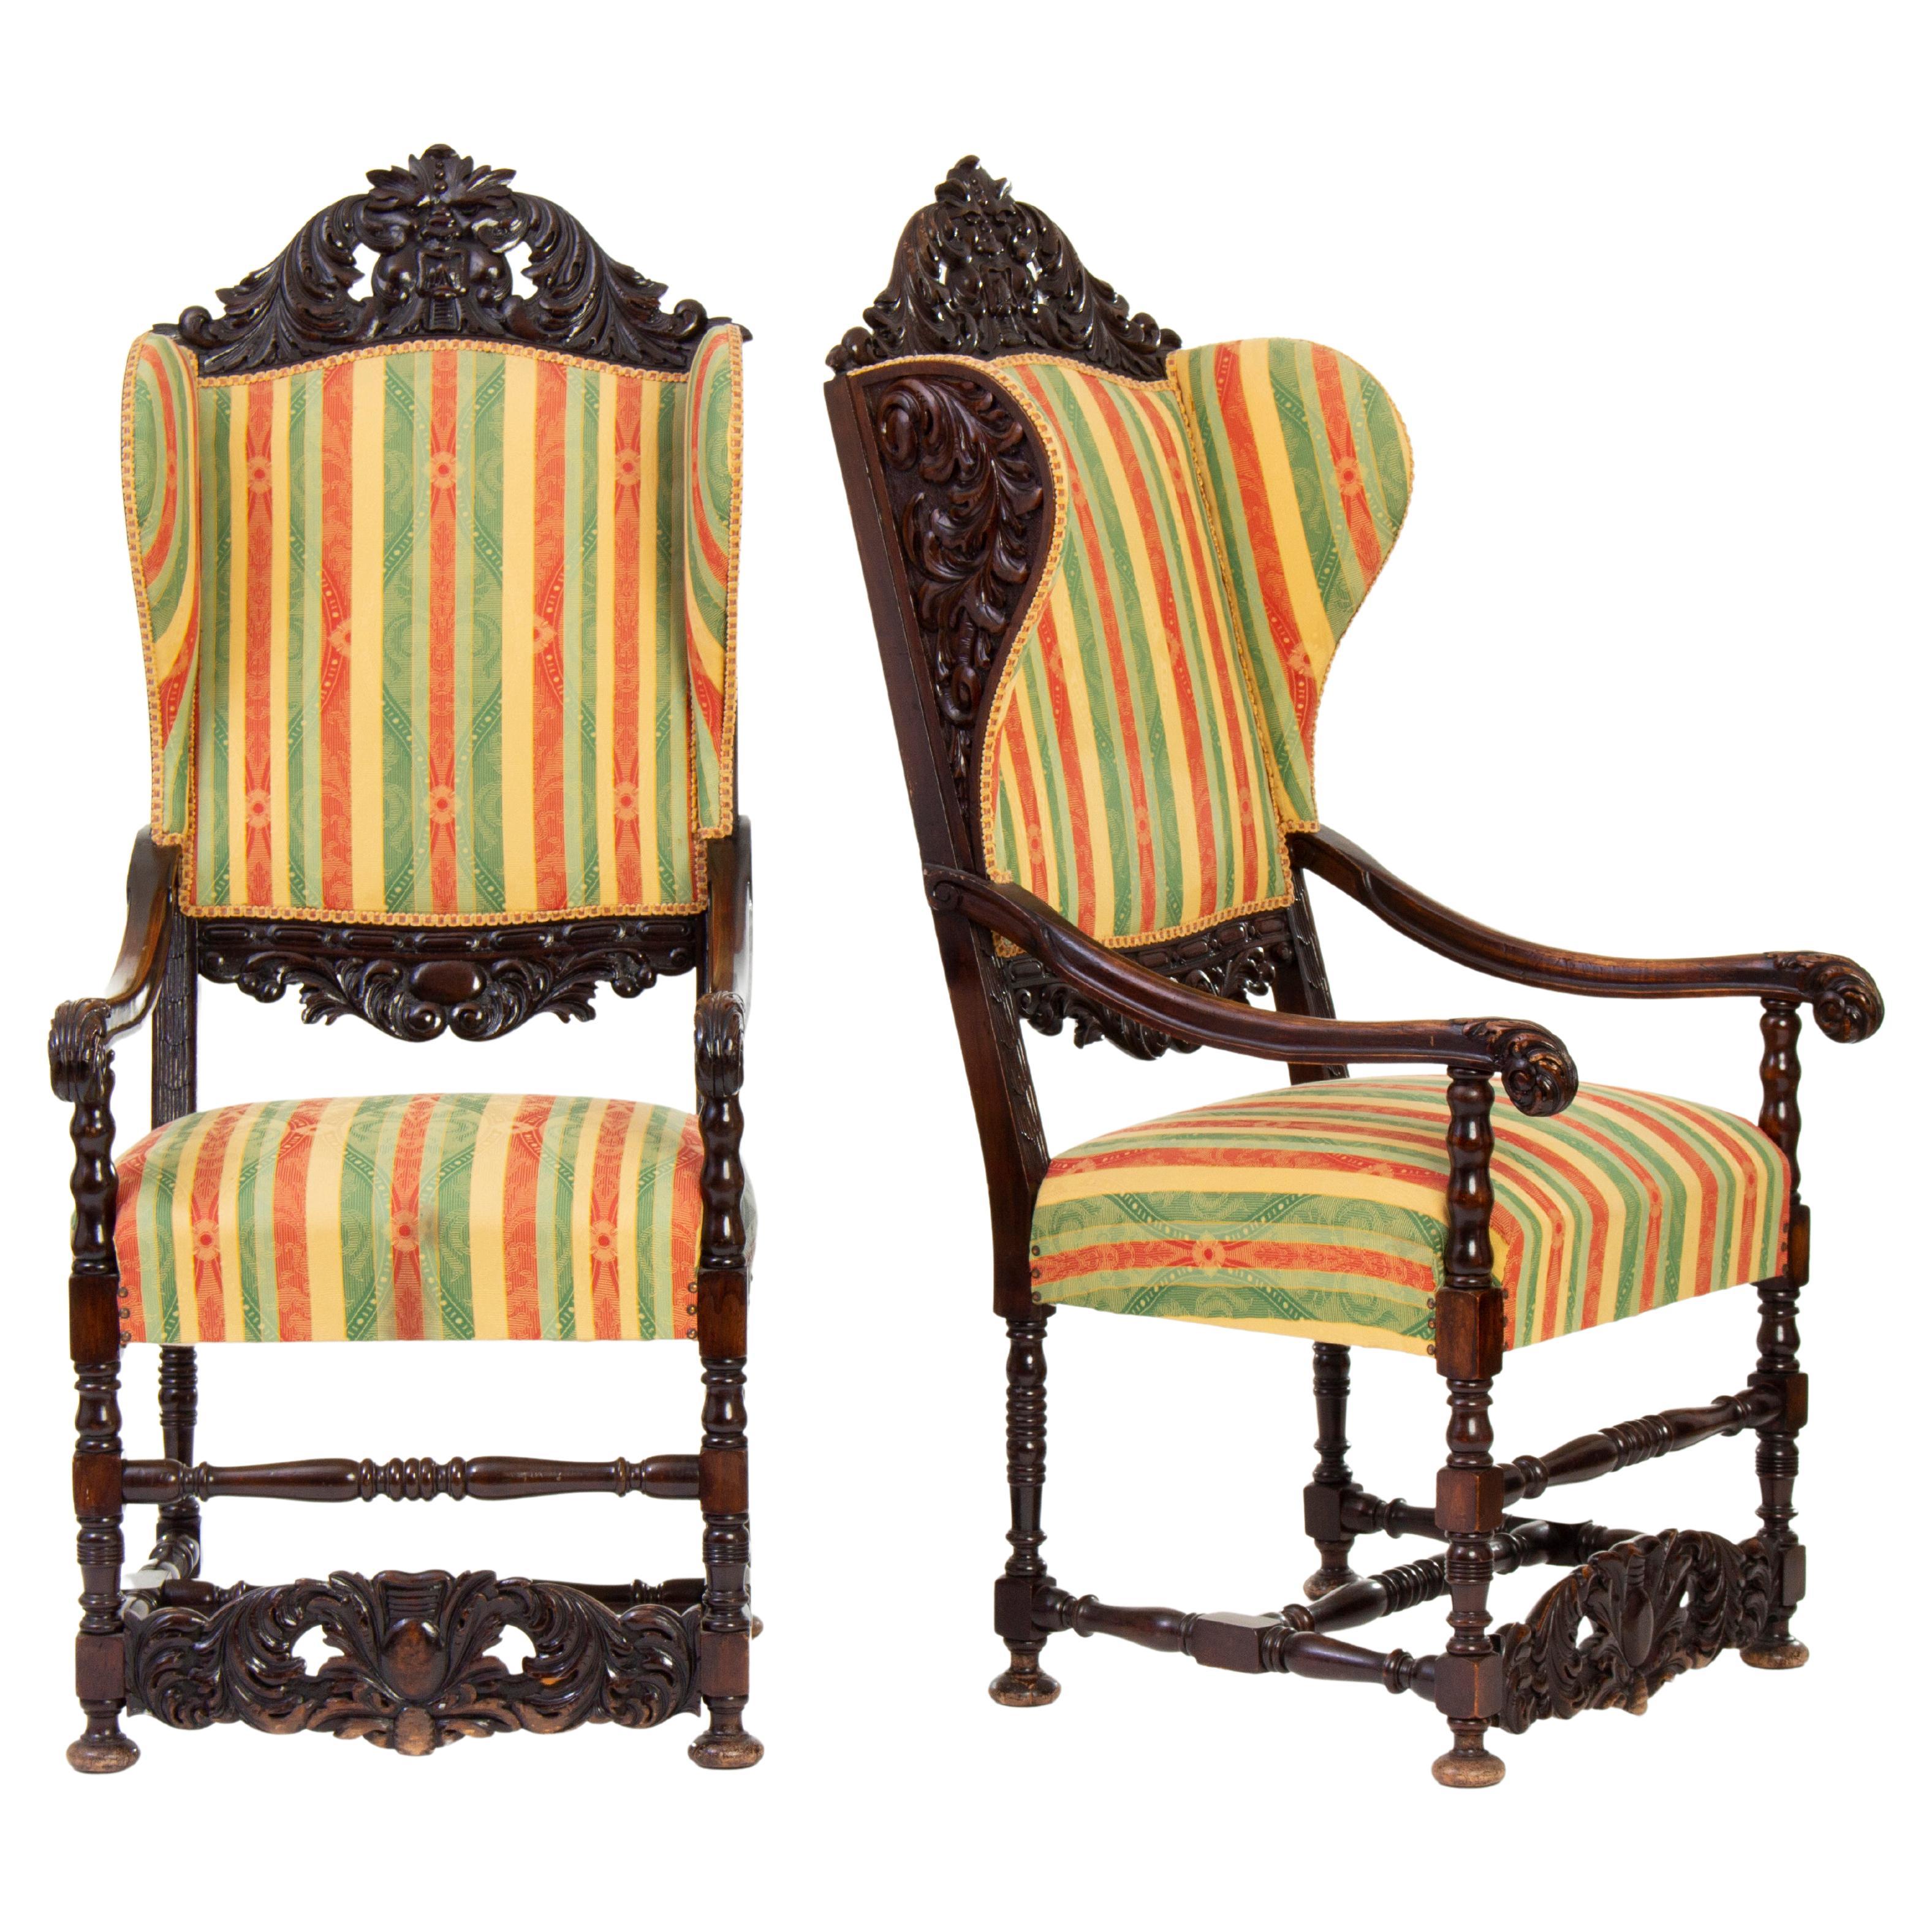 Antique Carved Basswood Wingchairs in Historicist Style (2 pieces) For Sale